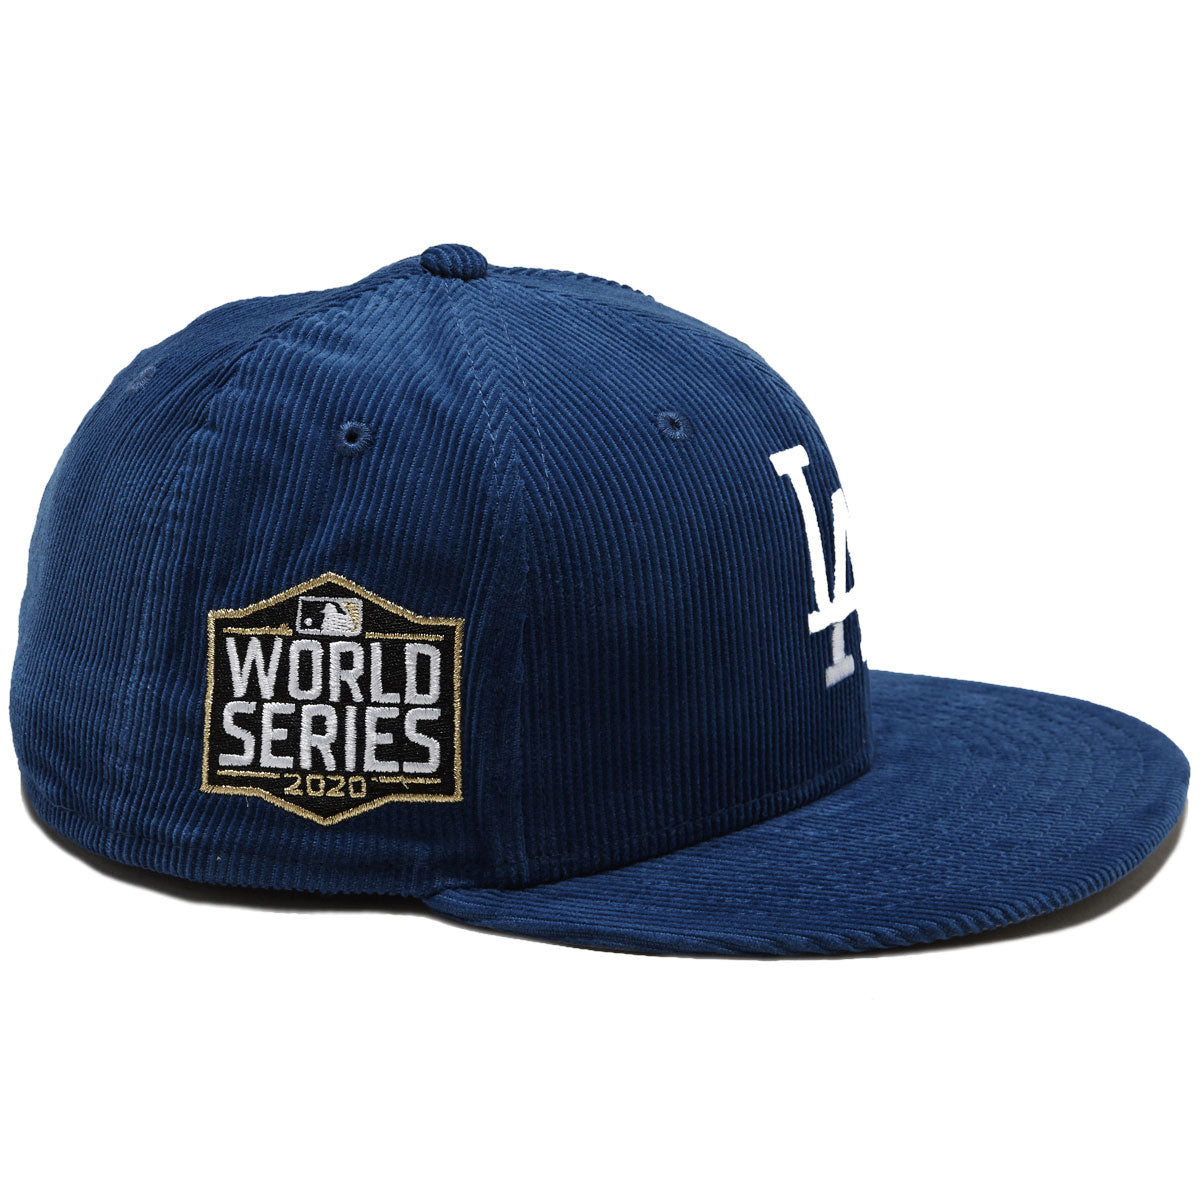 New Era Throwback Cord 17208 Los Angeles Dodgers Hat - Blue image 3